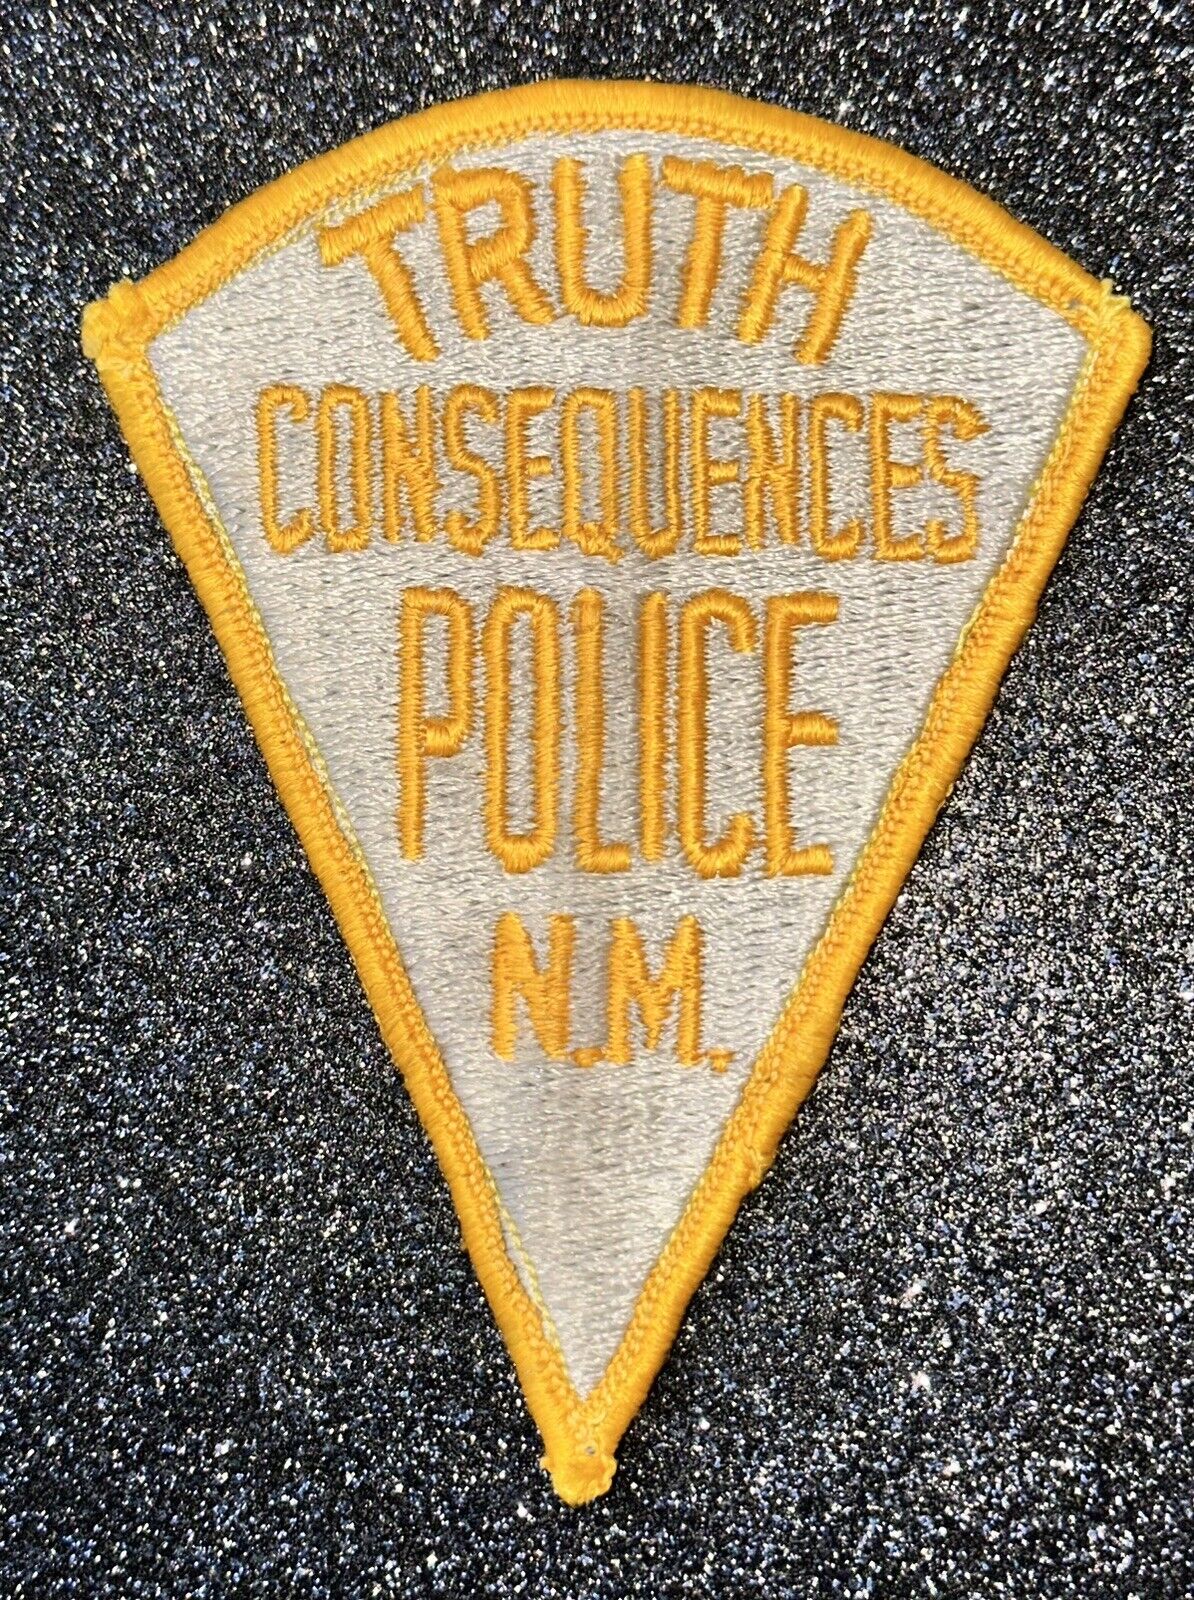 New Mexico Truth Consequences Police Patch NM 1960's Issue  3